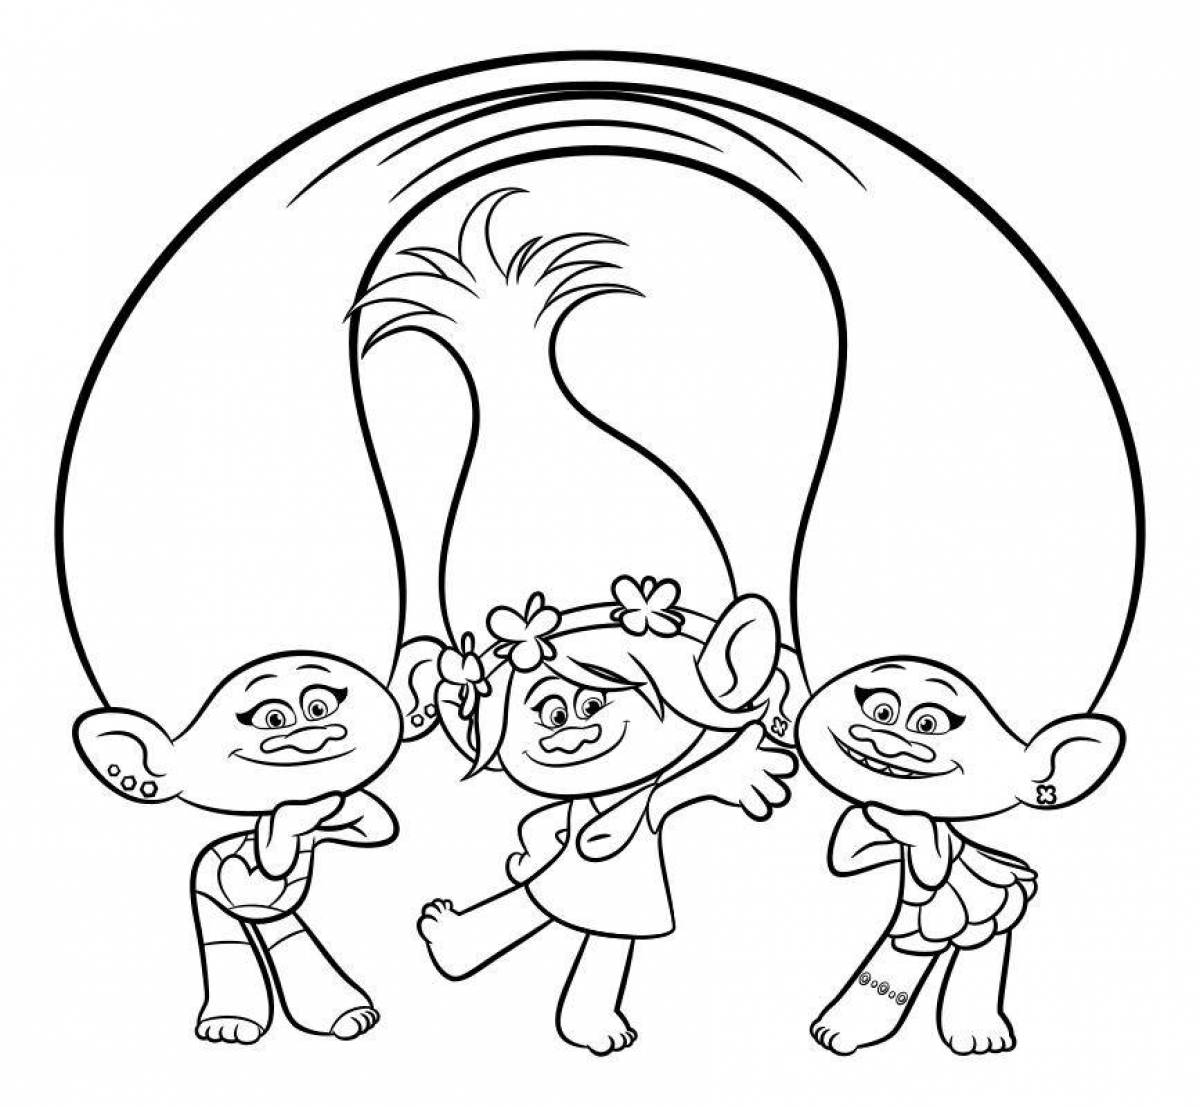 Famous pink trolls coloring page